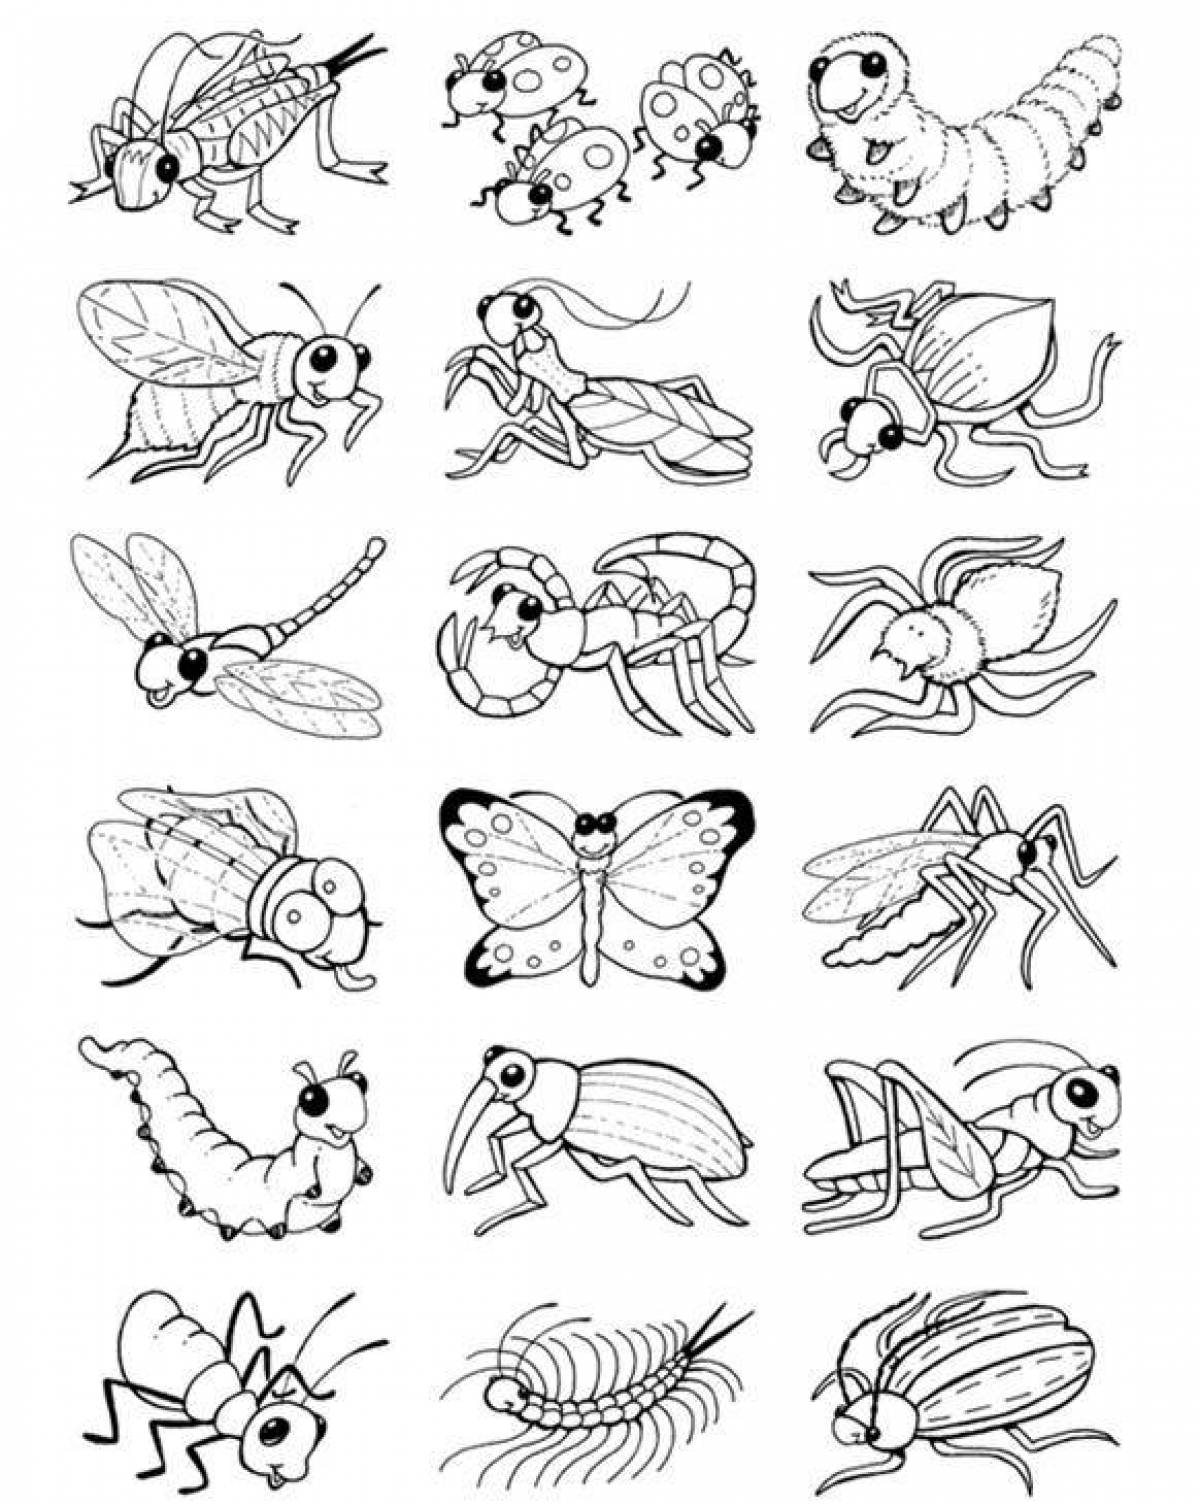 Incredible insect coloring pages for kids